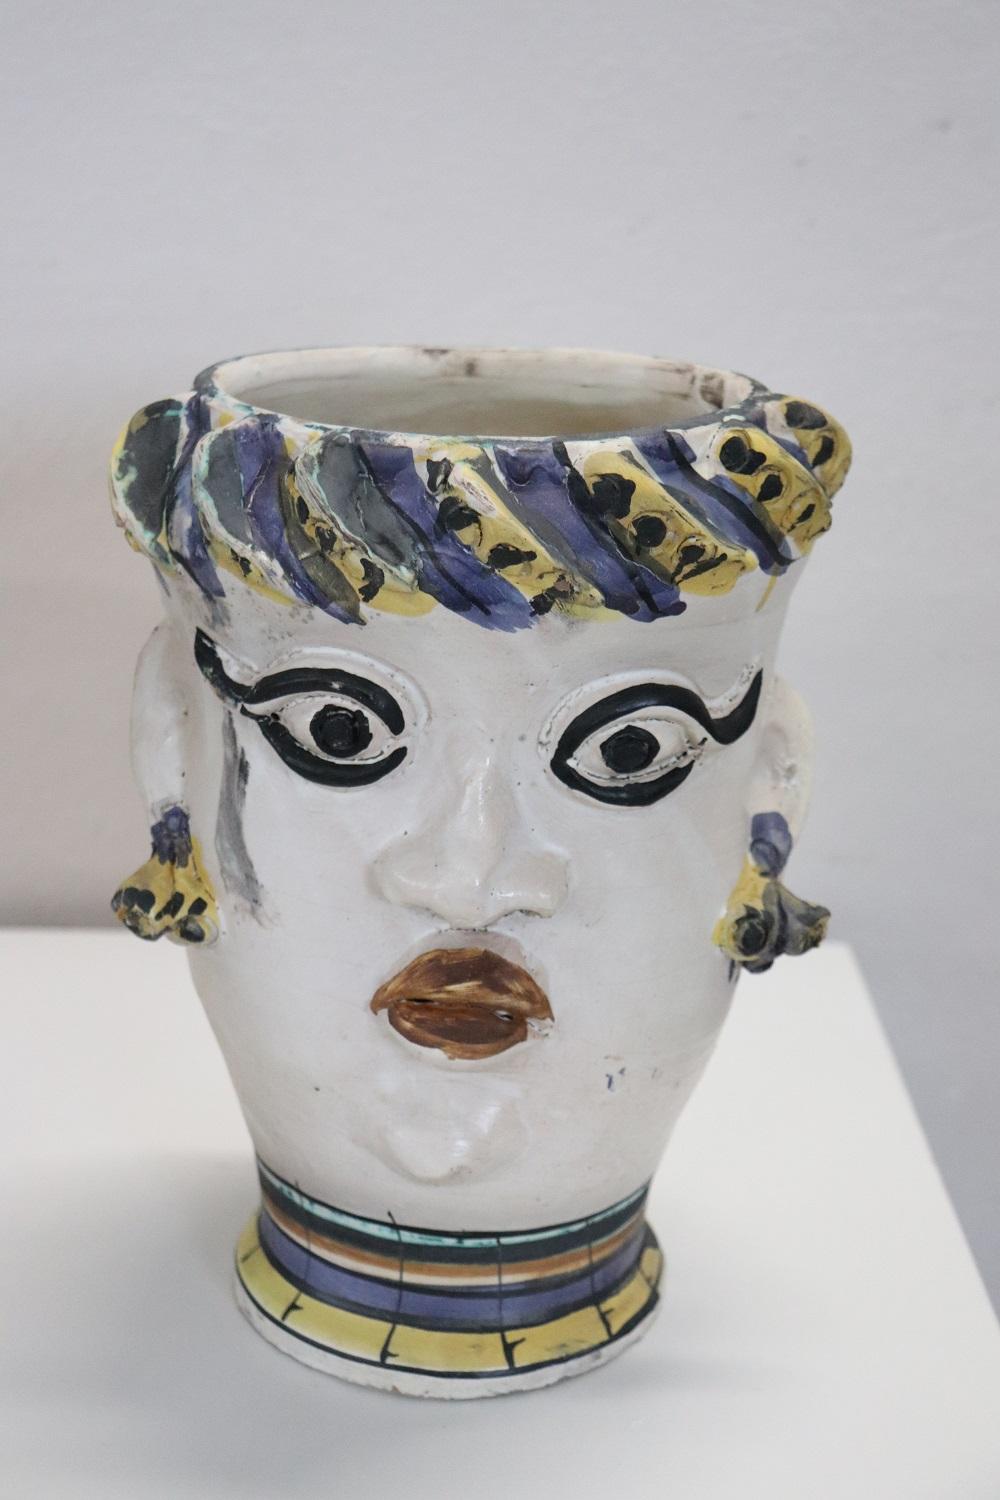 Beautiful vintage vase important Italian ceramic manufacture in Caltagirone, Sicilian city. Particular decoration with the face of a man and a woman. This is a collectible ceramic. See detailed photos.
 